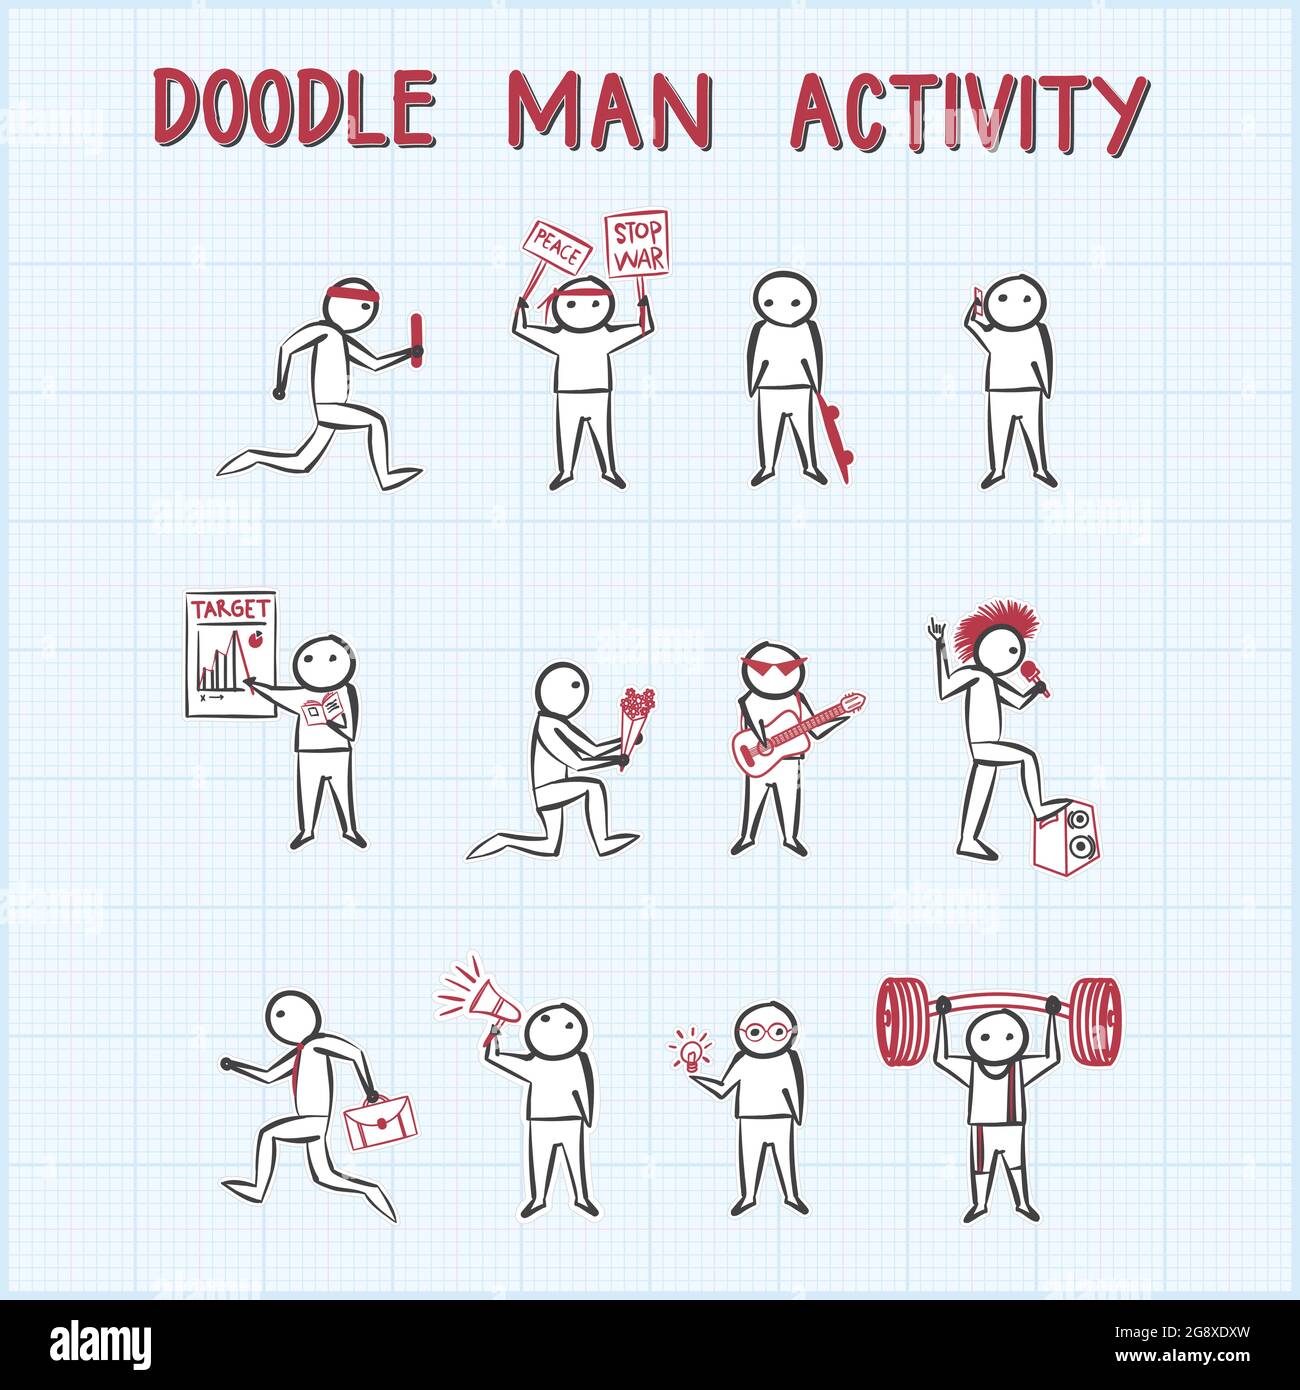 doodle man activity two color Stock Vector